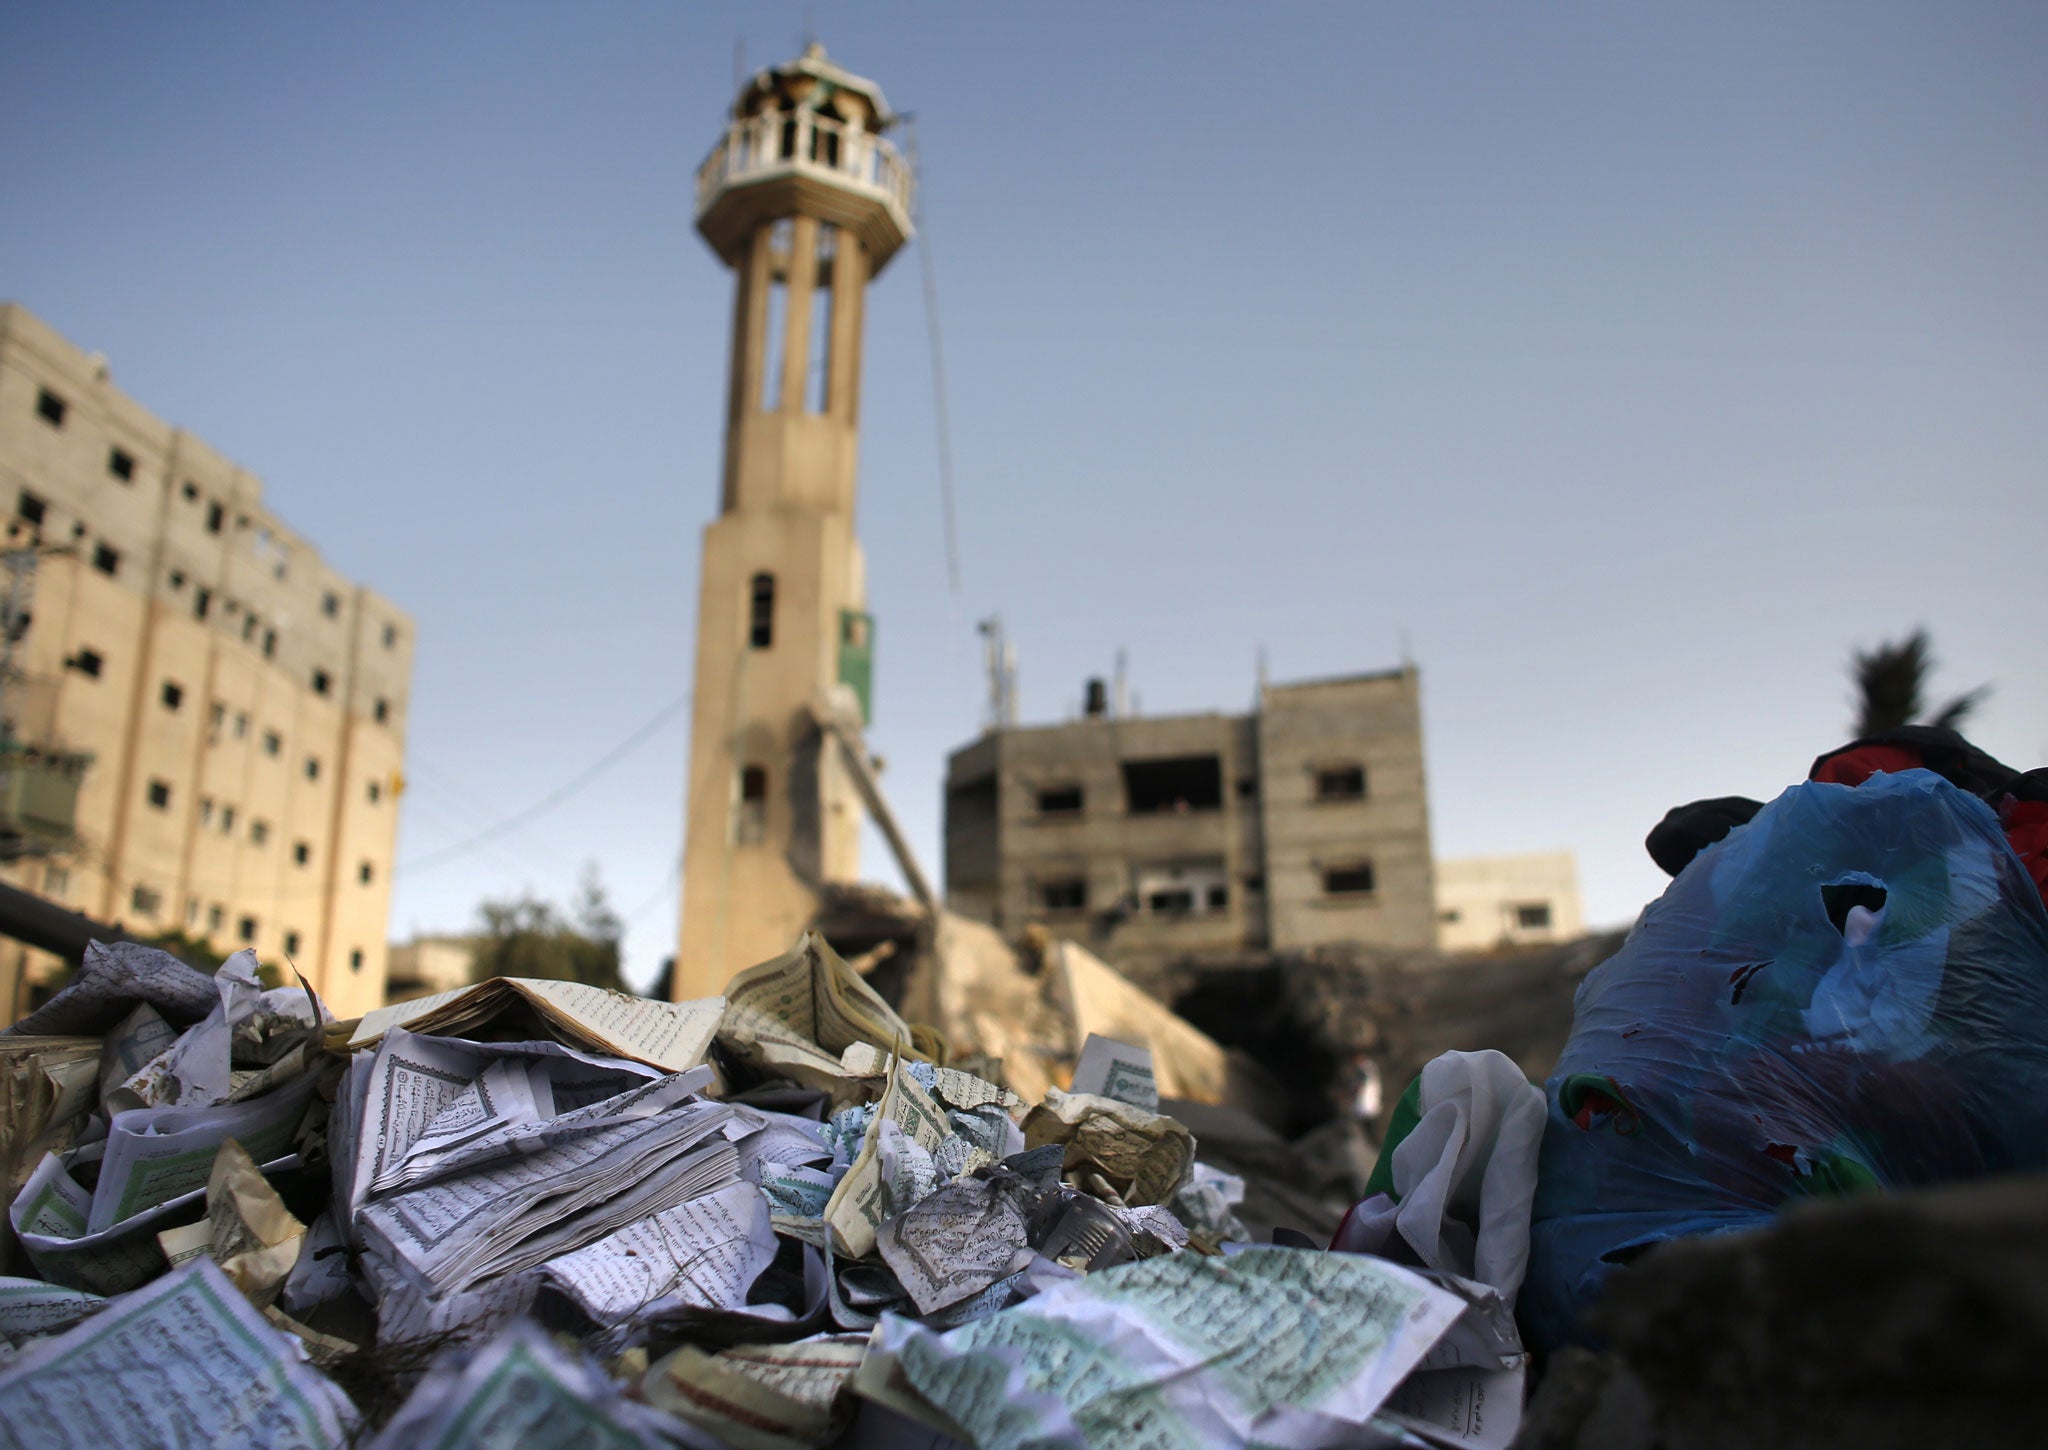 Damaged copies of Islam's holy book the Koran lie on the rubble from a destroyed mosque following an Israeli military strike in the Nusseirat refugee camp in the central Gaza Strip